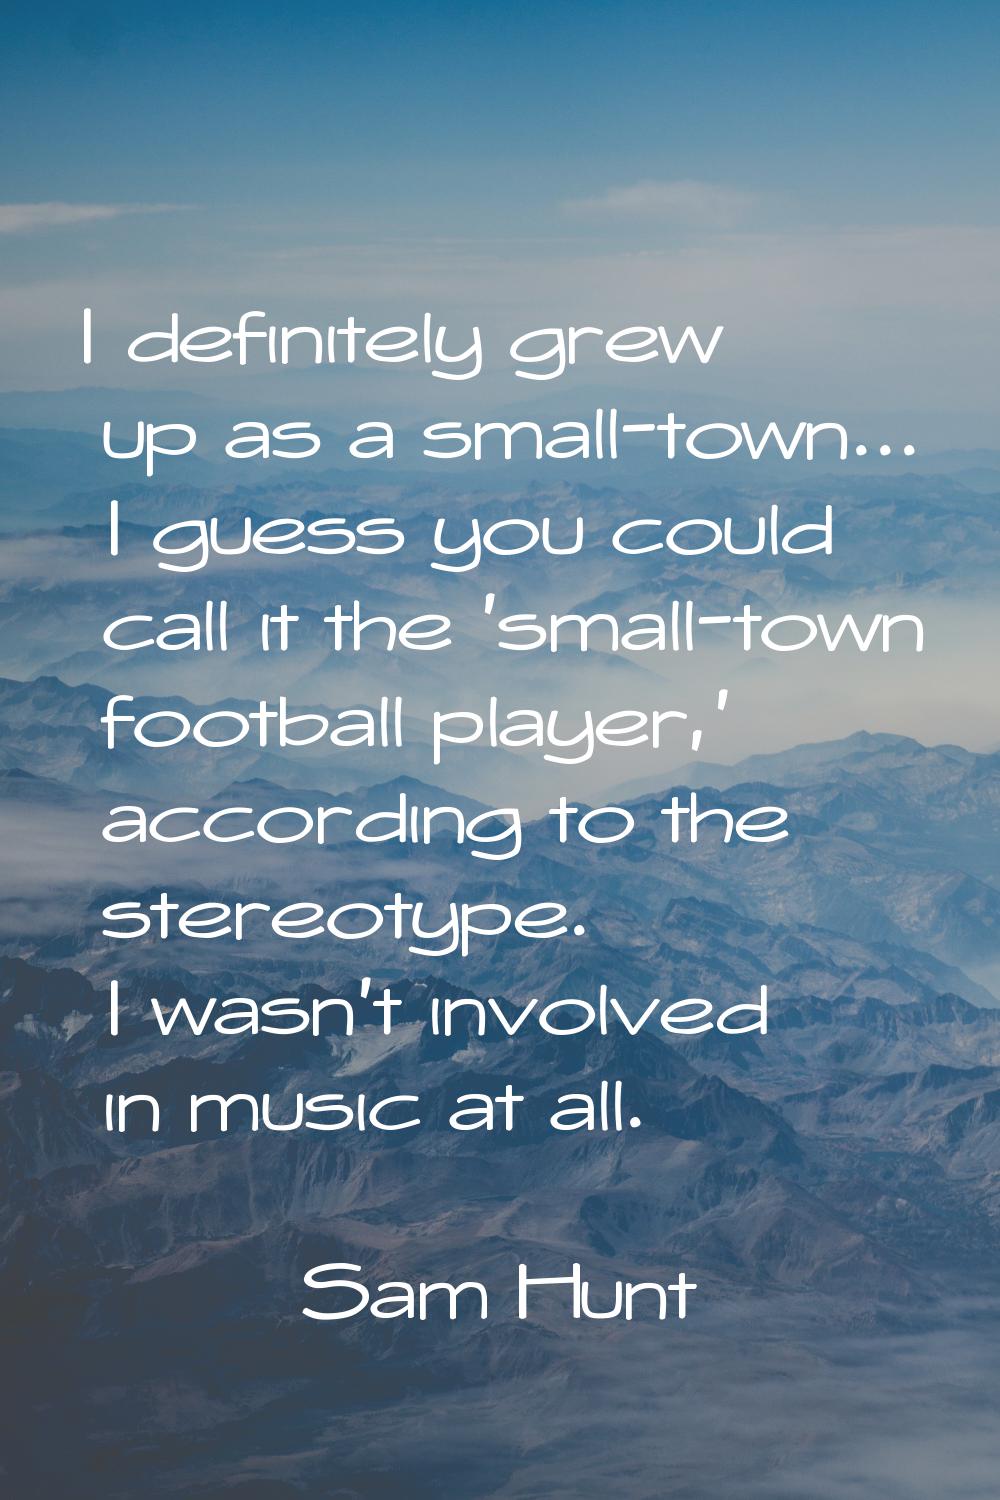 I definitely grew up as a small-town... I guess you could call it the 'small-town football player,'